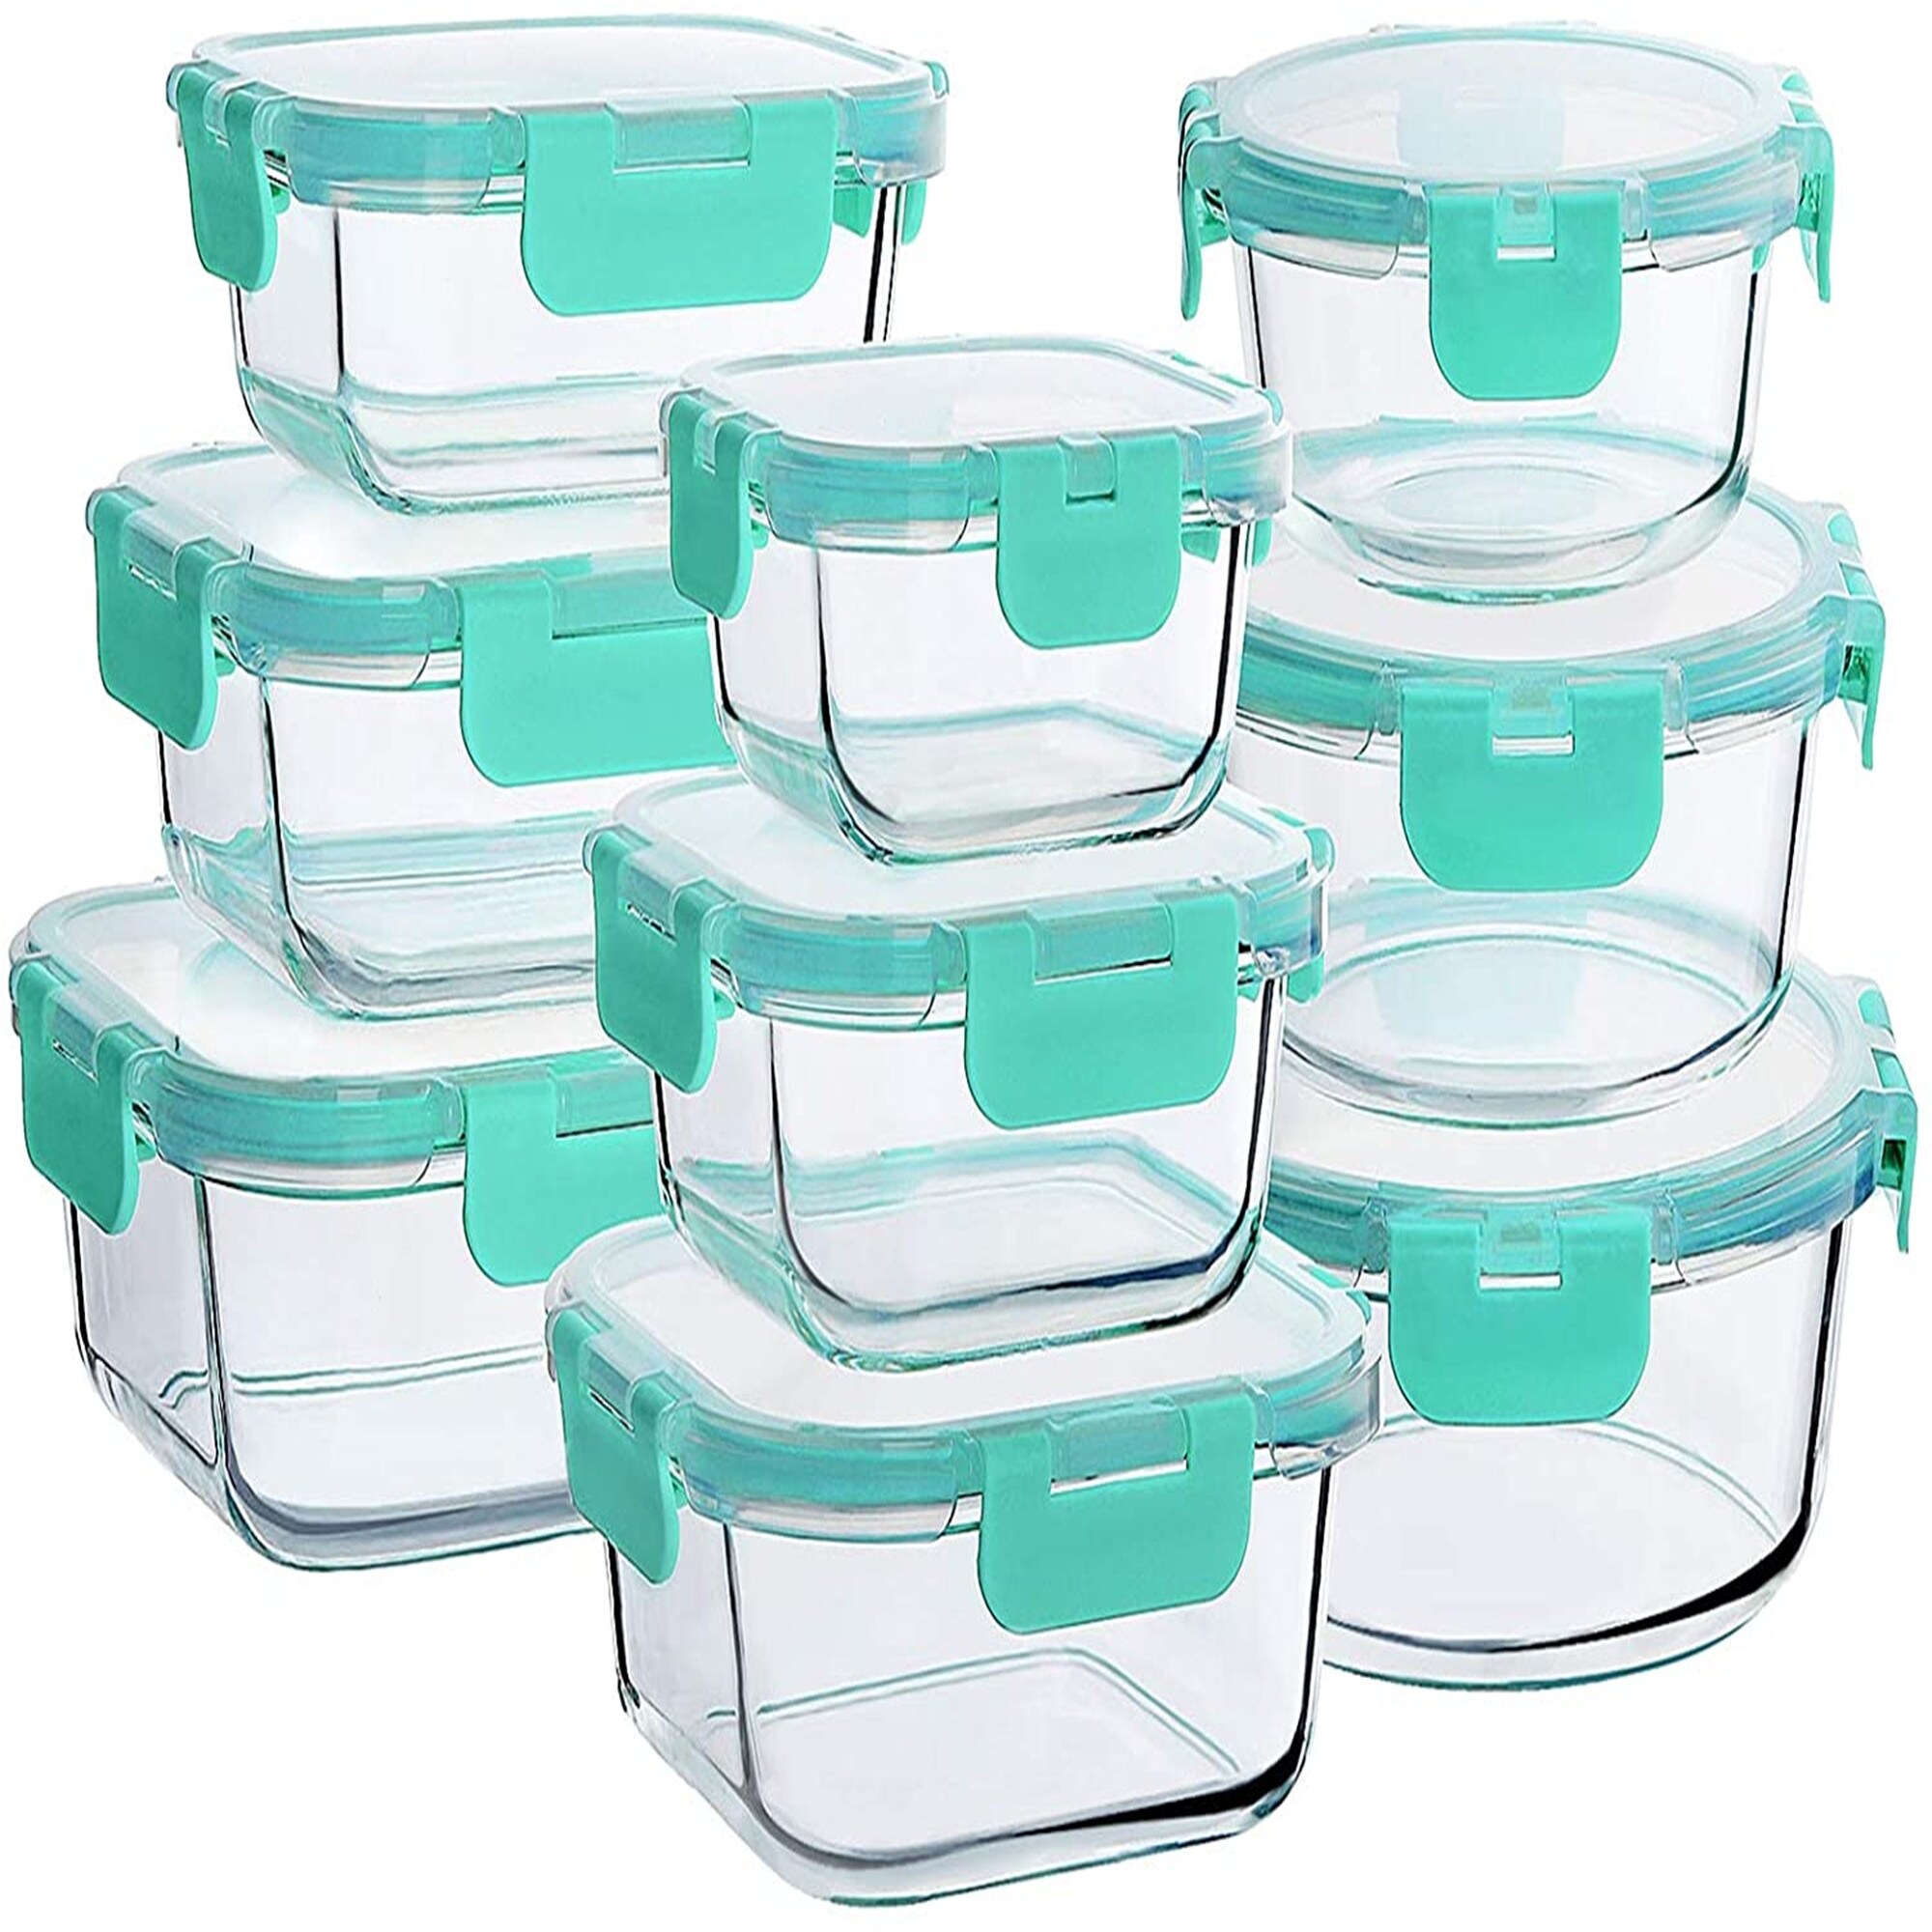 https://ak1.ostkcdn.com/images/products/is/images/direct/ab1dab88b3ee546820d48b0c36ff1ca68dea8b79/Glass-Food-Storage-Containers-with-Lids%2C-%5B18-Piece%5D-Glass-Meal-Prep-Containers%2C-BPA-Free-%26-Leak-Proof-%289-lids-%26-9-Containers%29.jpg